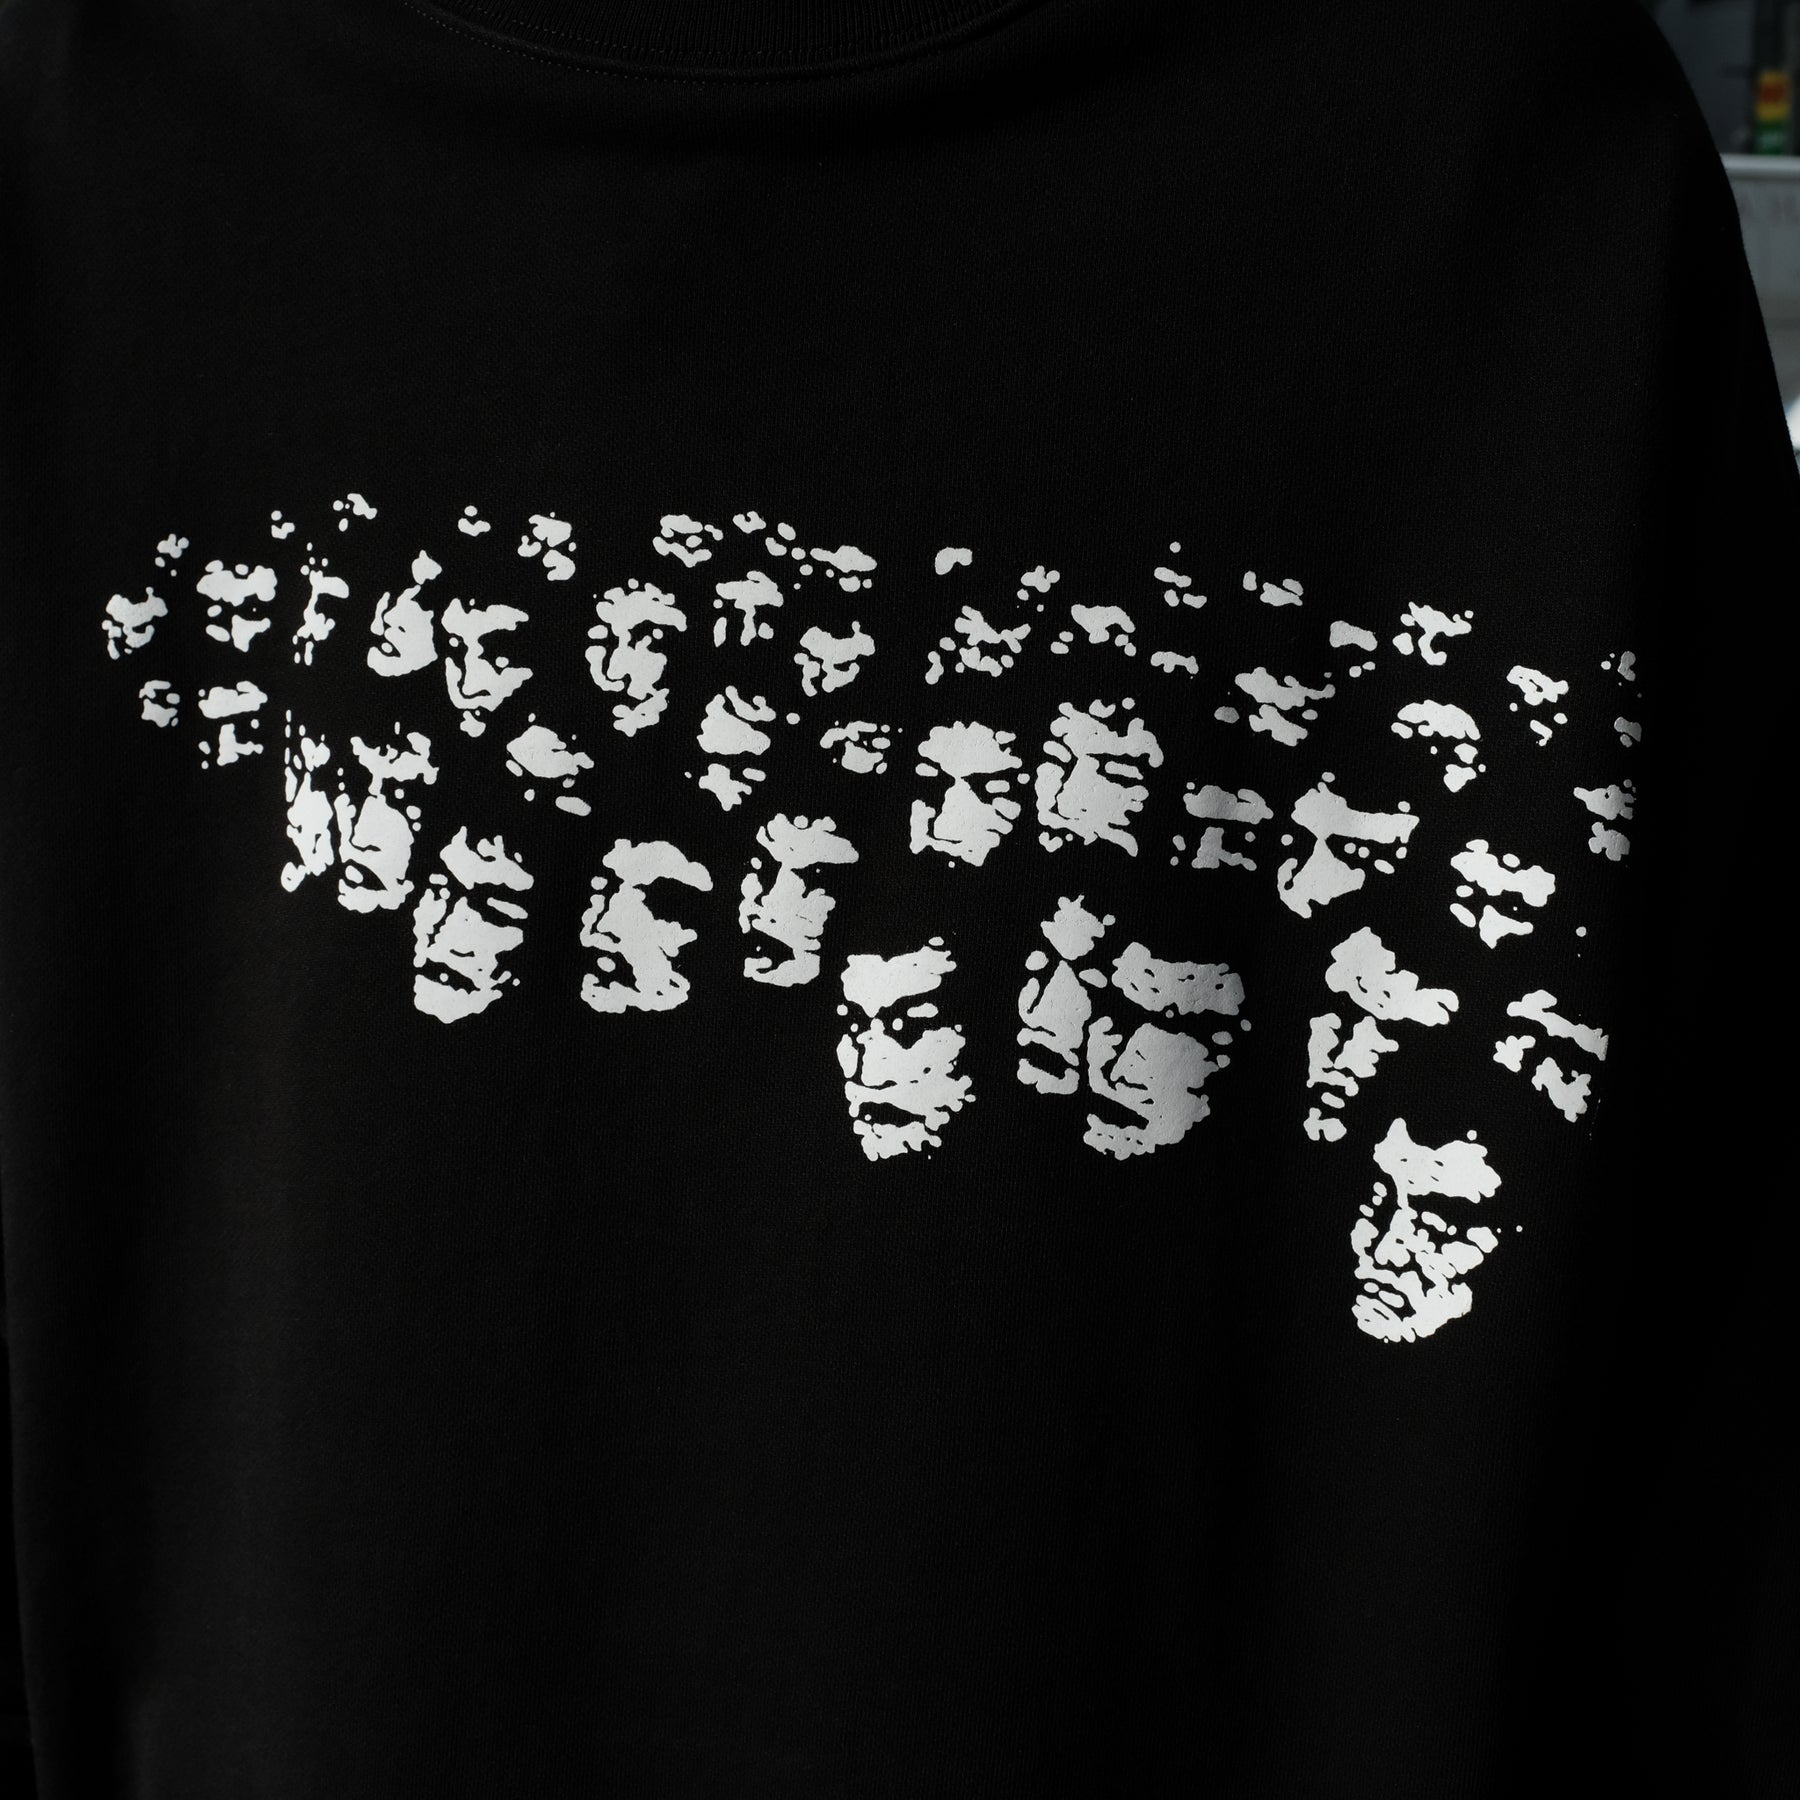 WILLY CHAVARRIA / CROWD OF HEADS MOCK NECK SWEAT SOLID BLACK